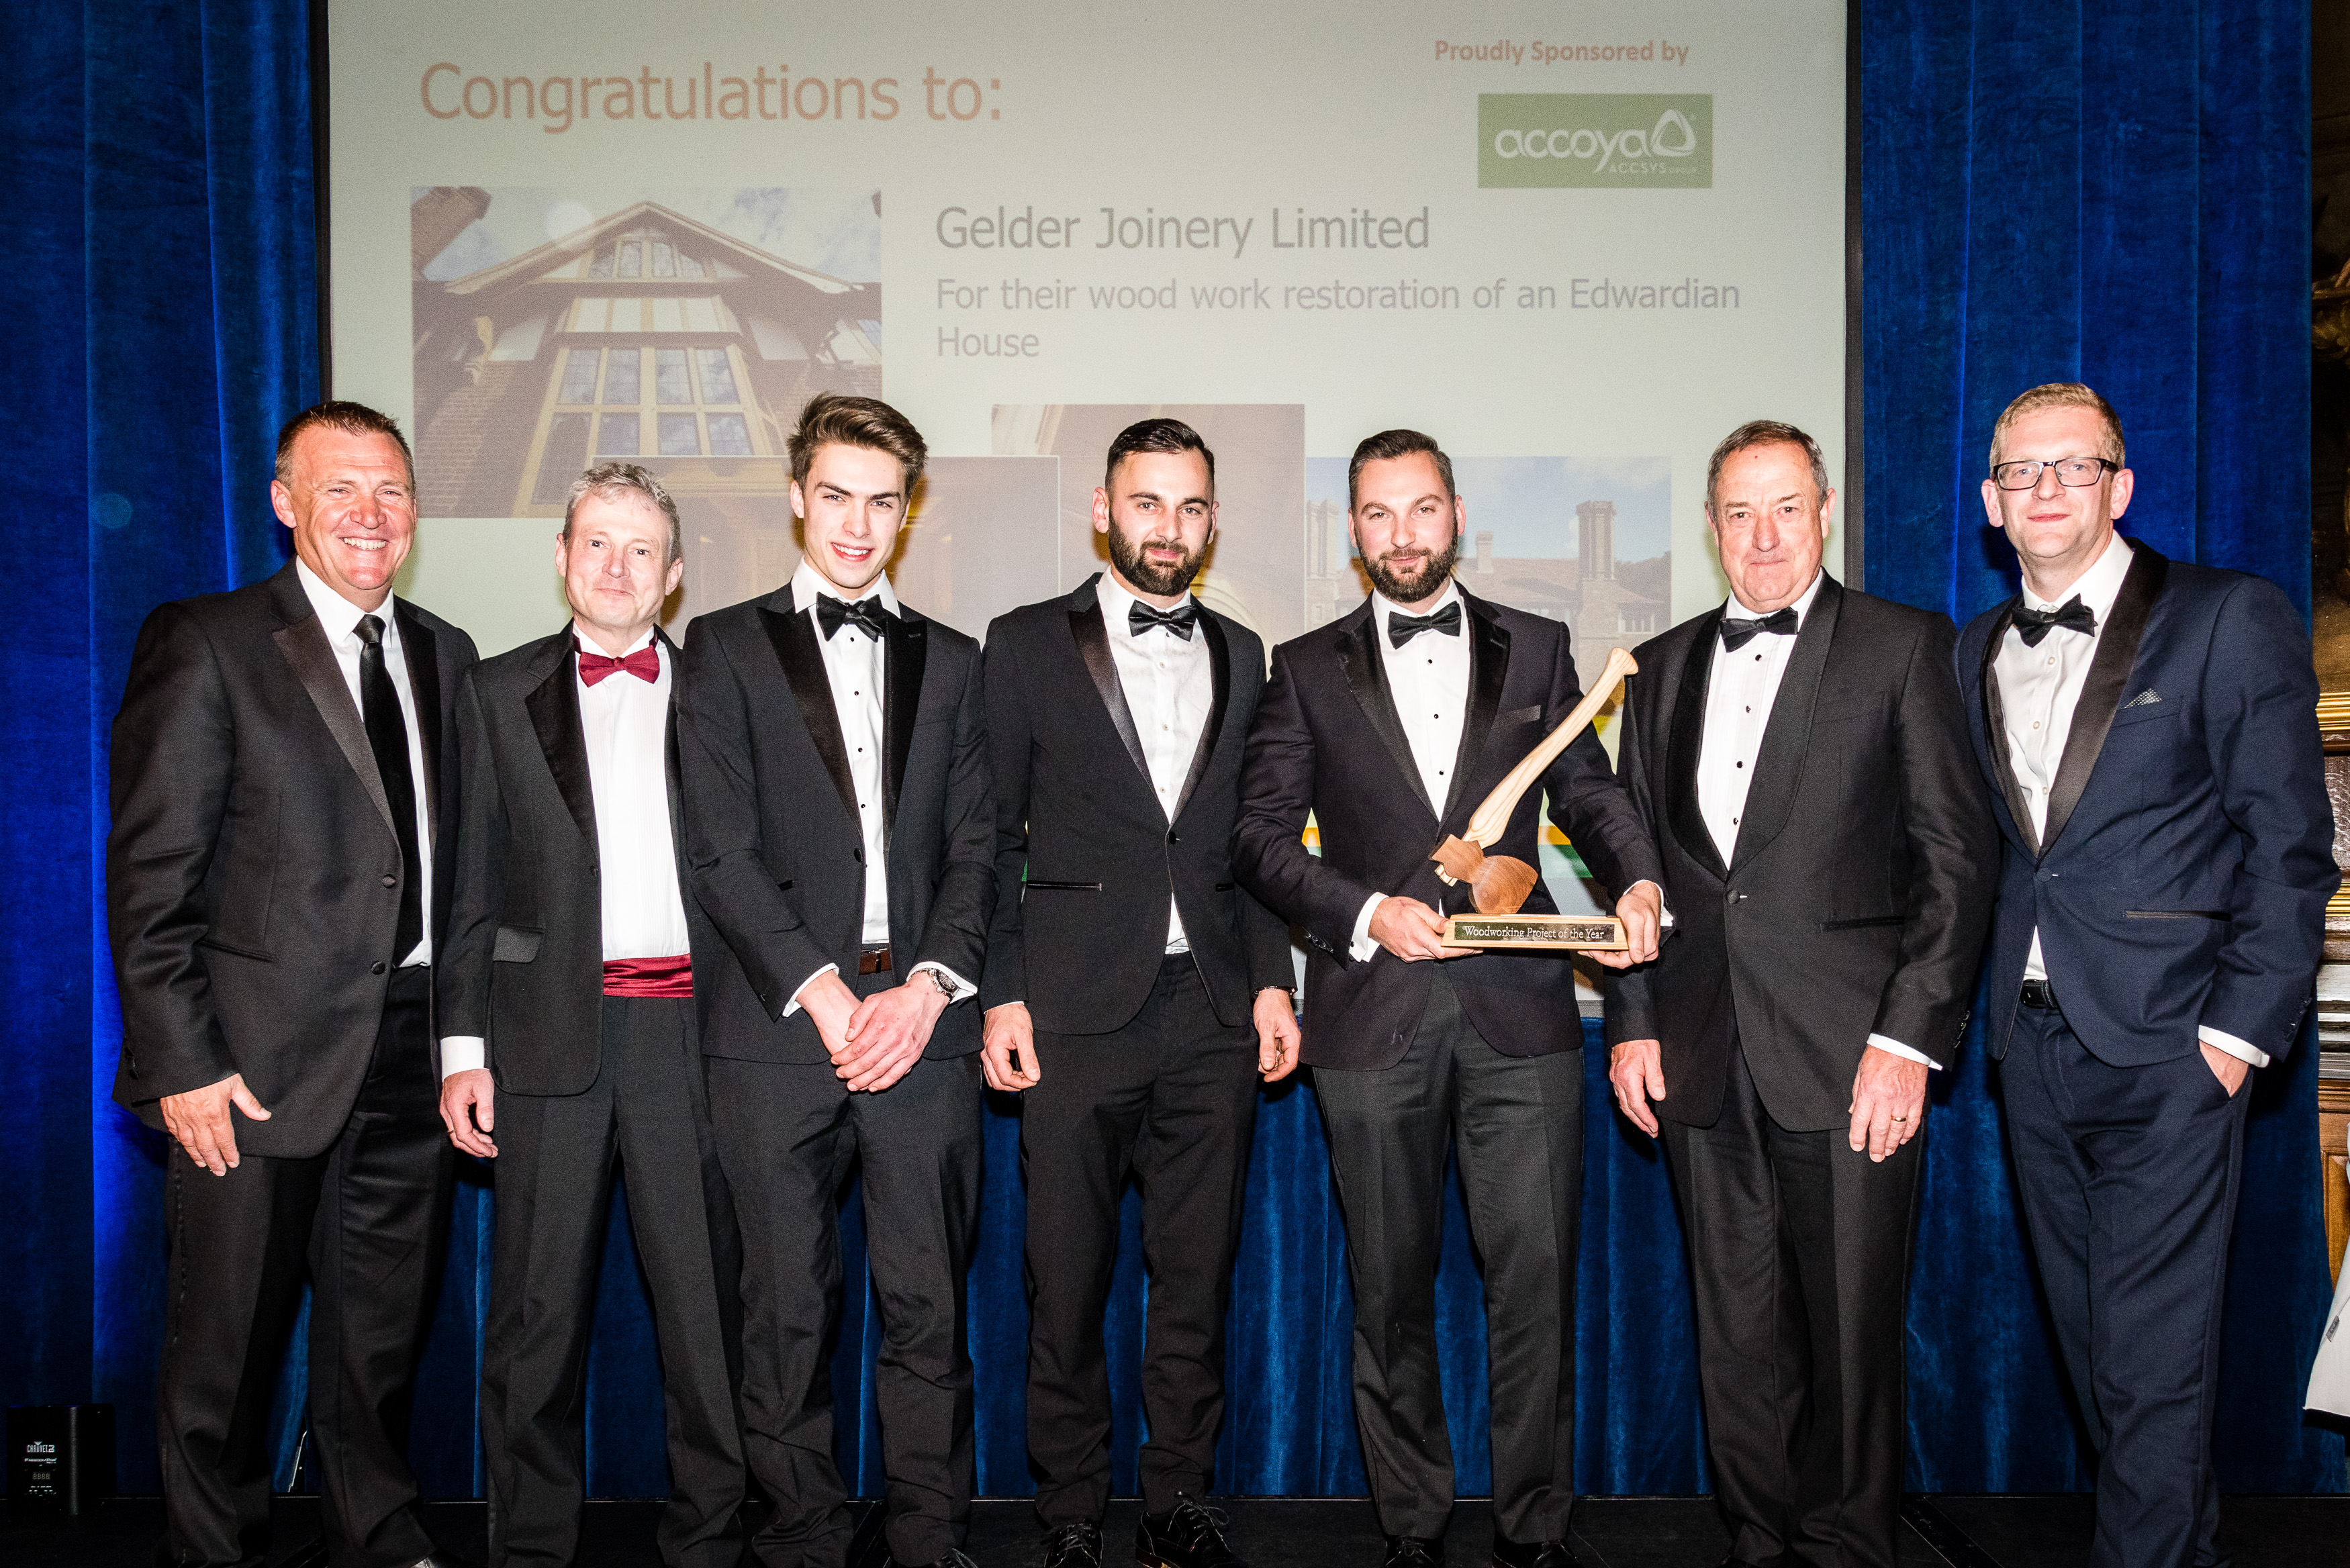 Rising stars and woodworking success stories celebrated at industry awards